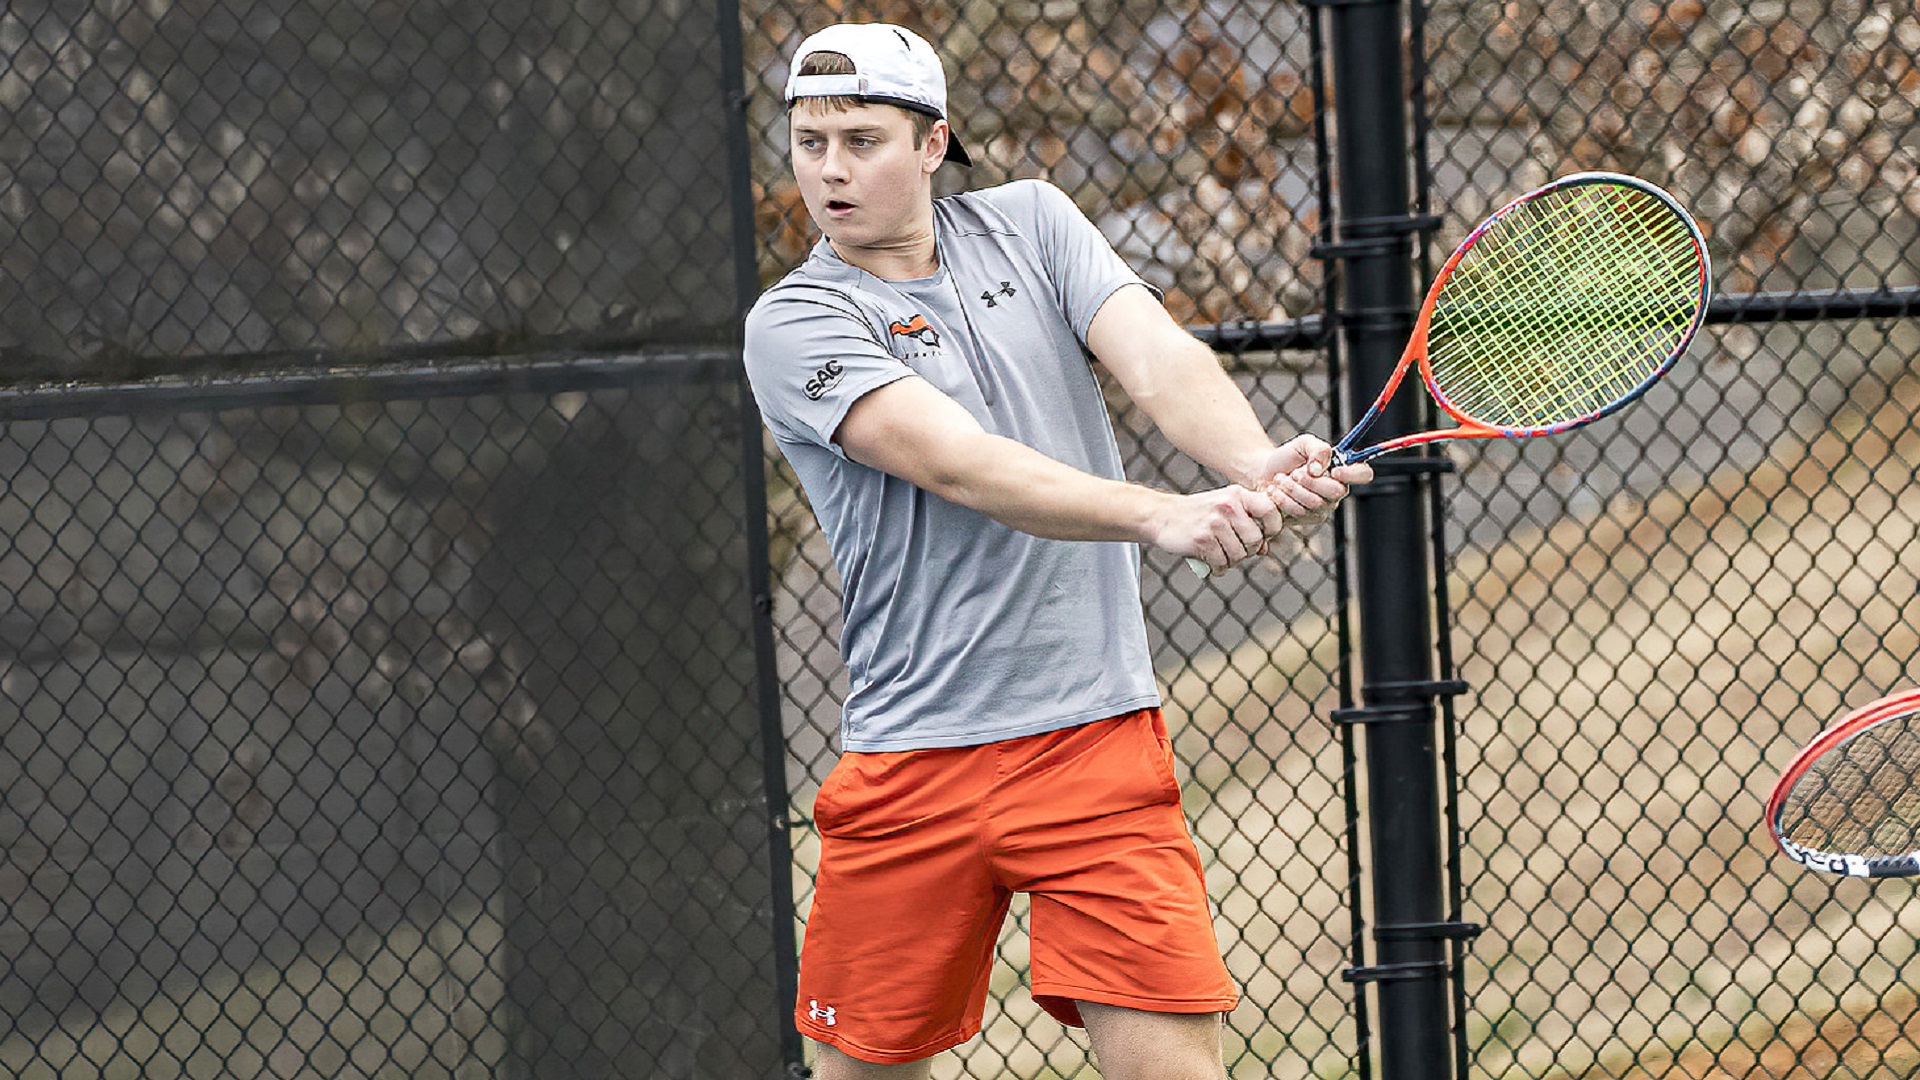 Rhodri Atkinson won in both singles and doubles for the Pioneers against Lee (photo by Chuck Williams)